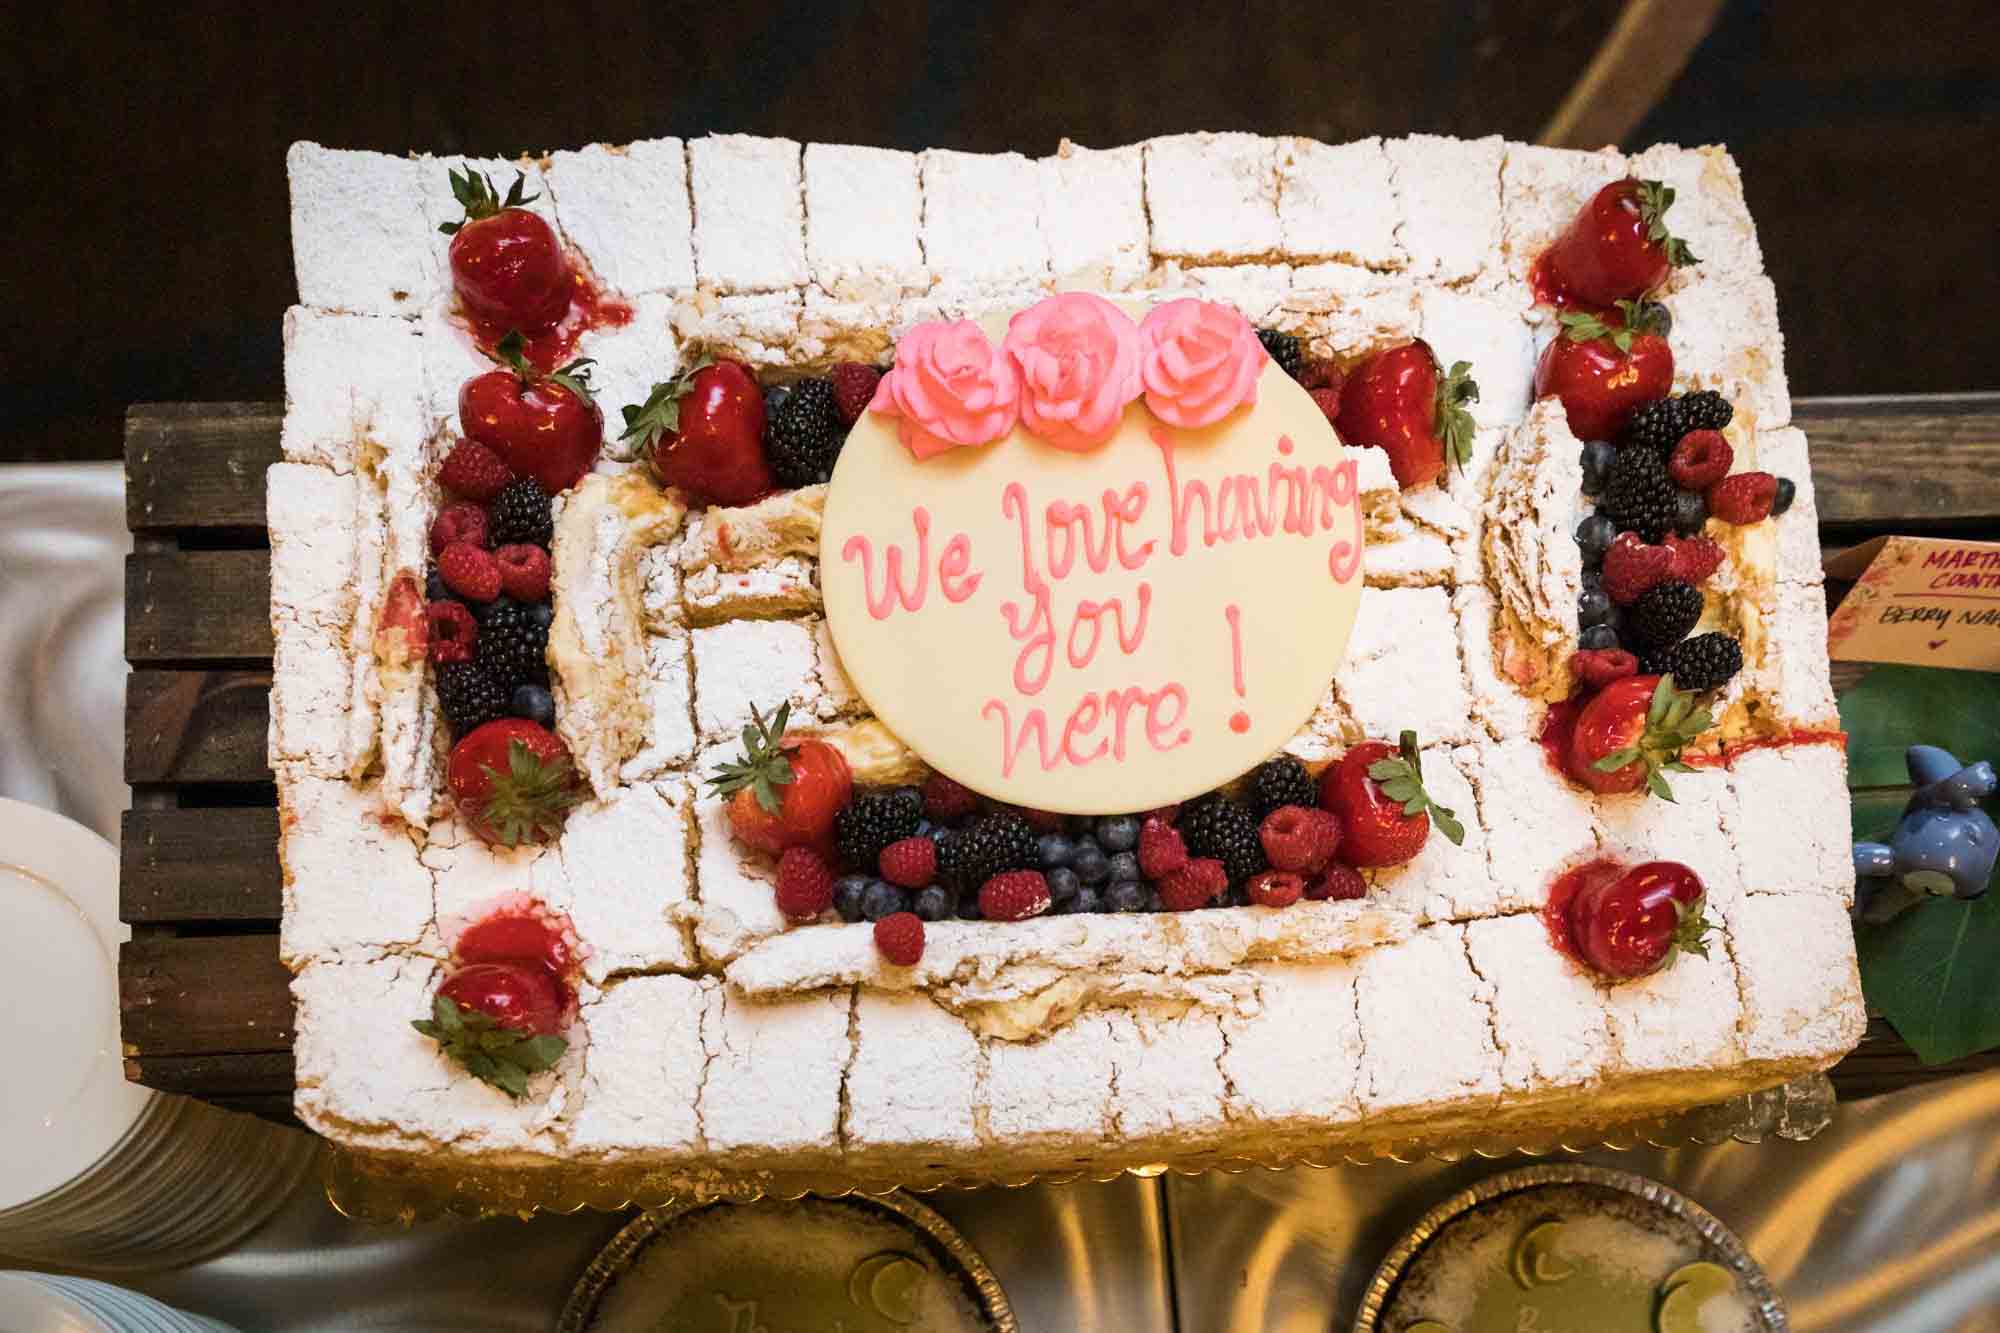 White cake decorated with strawberries and frosting reading 'We love having you here' at a Sheraton LaGuardia East Hotel wedding